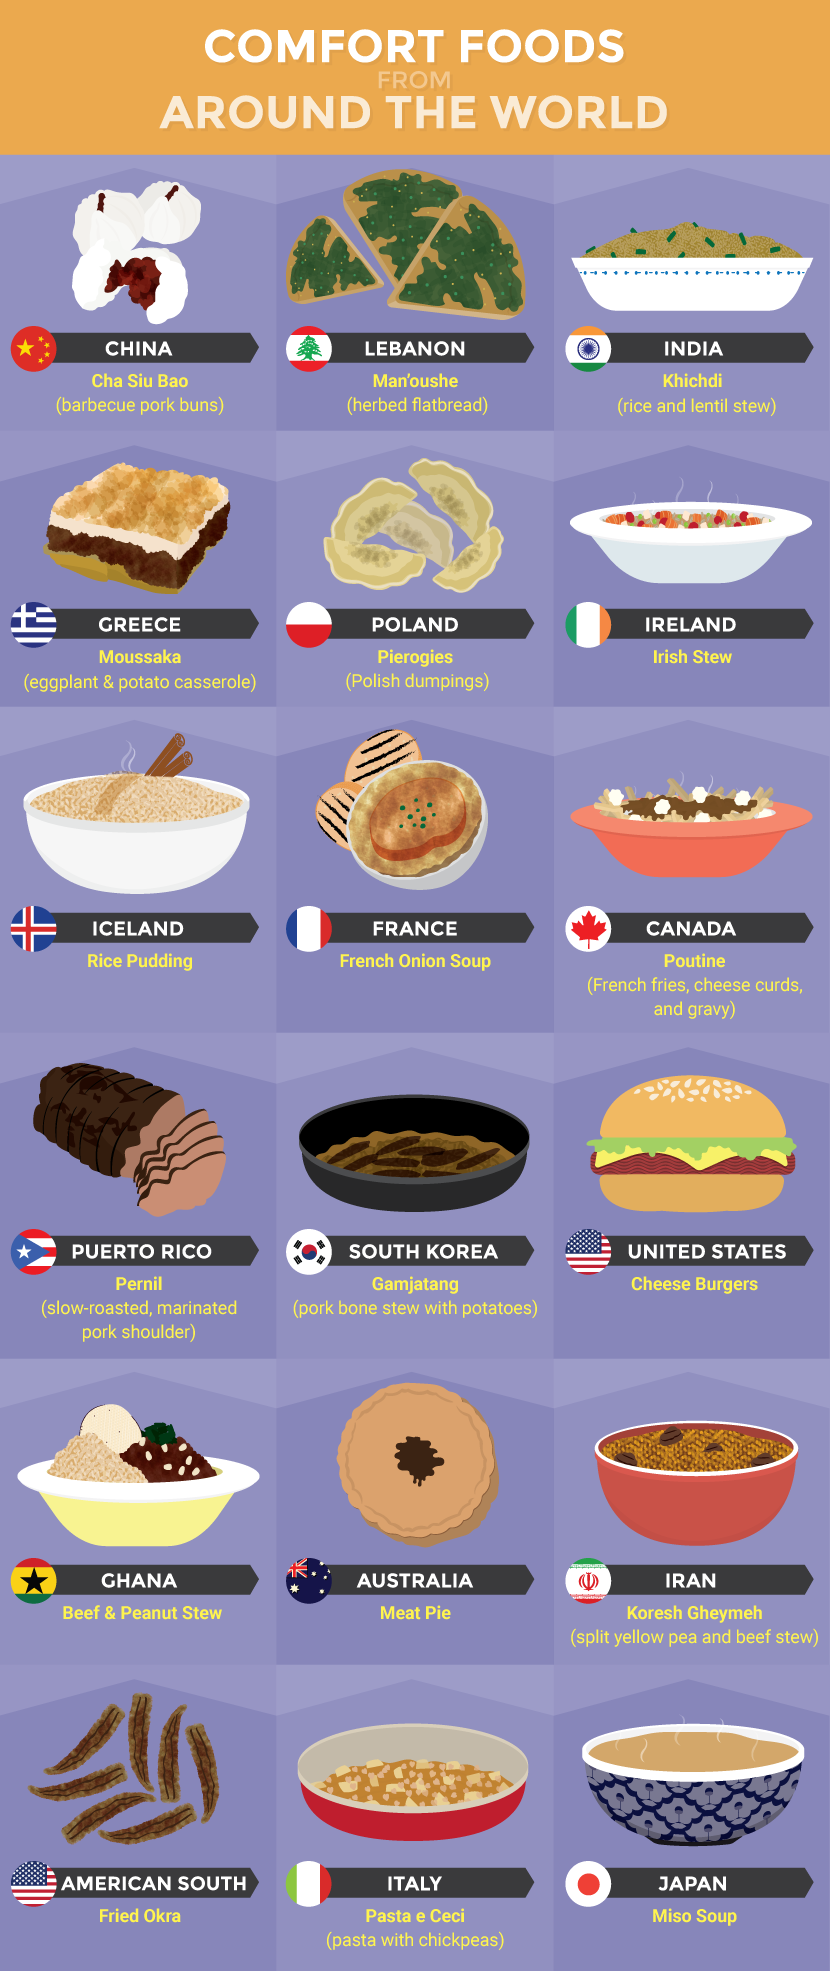 Comfort Foods From Different Countries Around the World